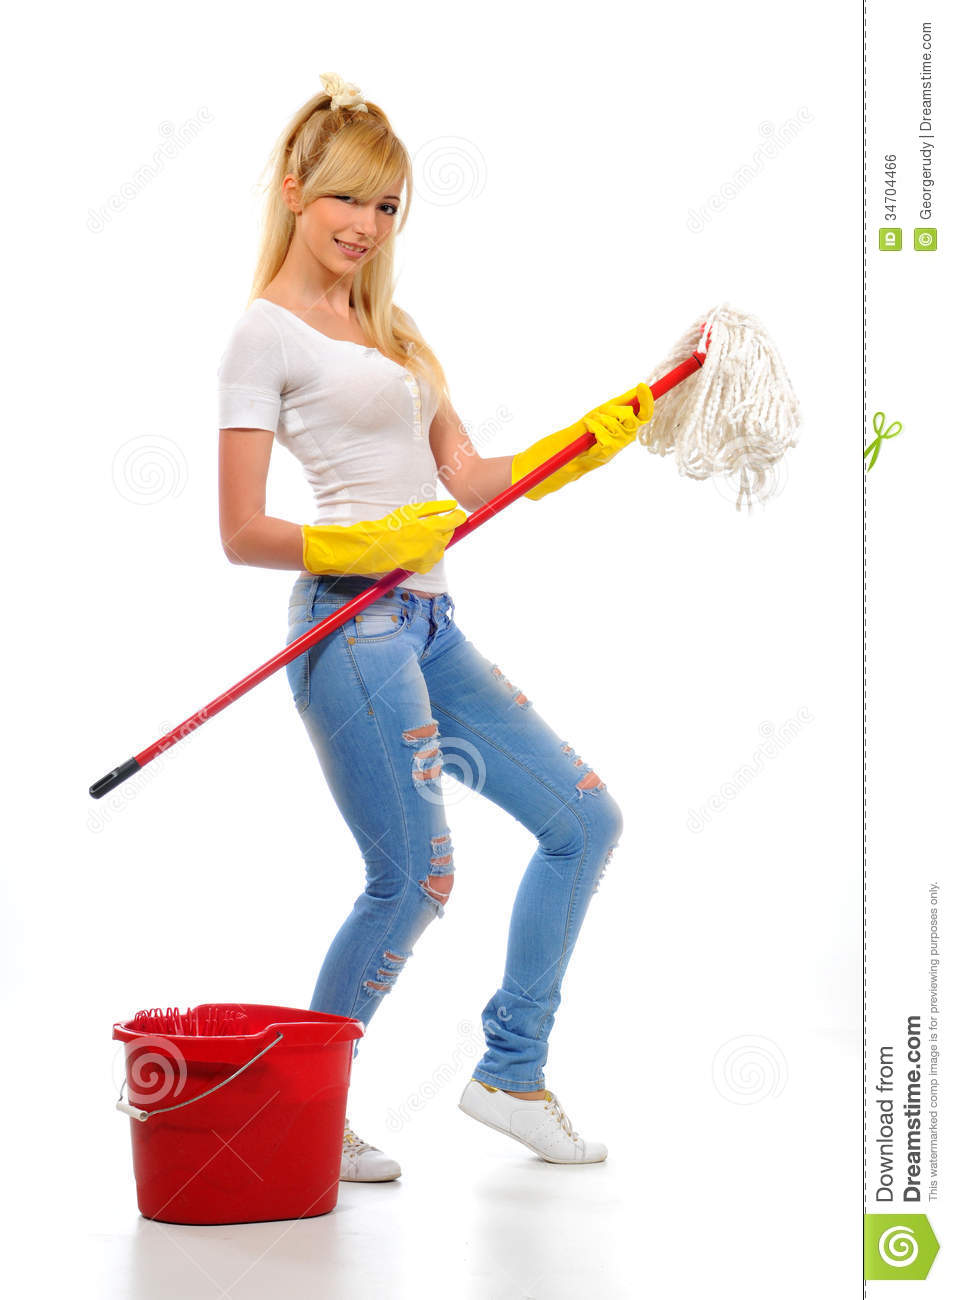 Cleaning Woman Washing Floor With Mop And Bucket During Spring